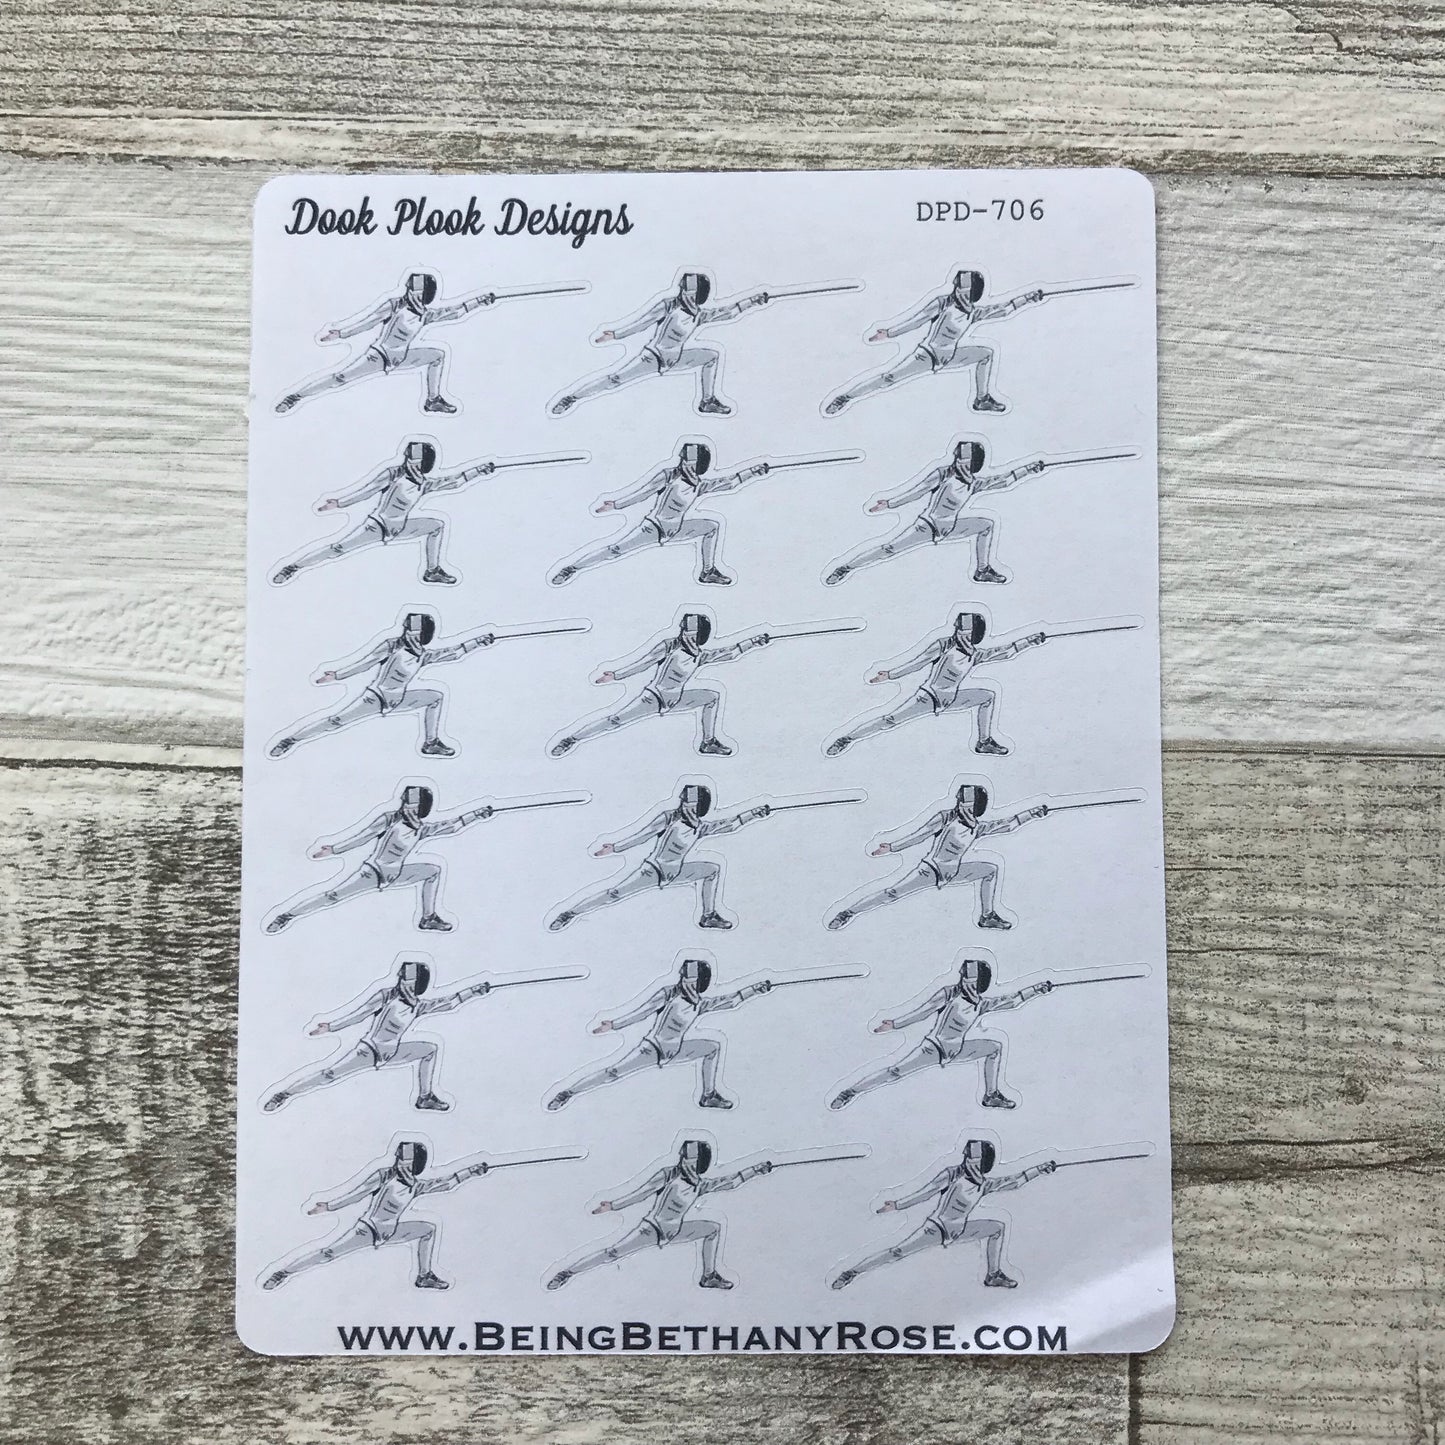 Fencing stickers (DPD706)